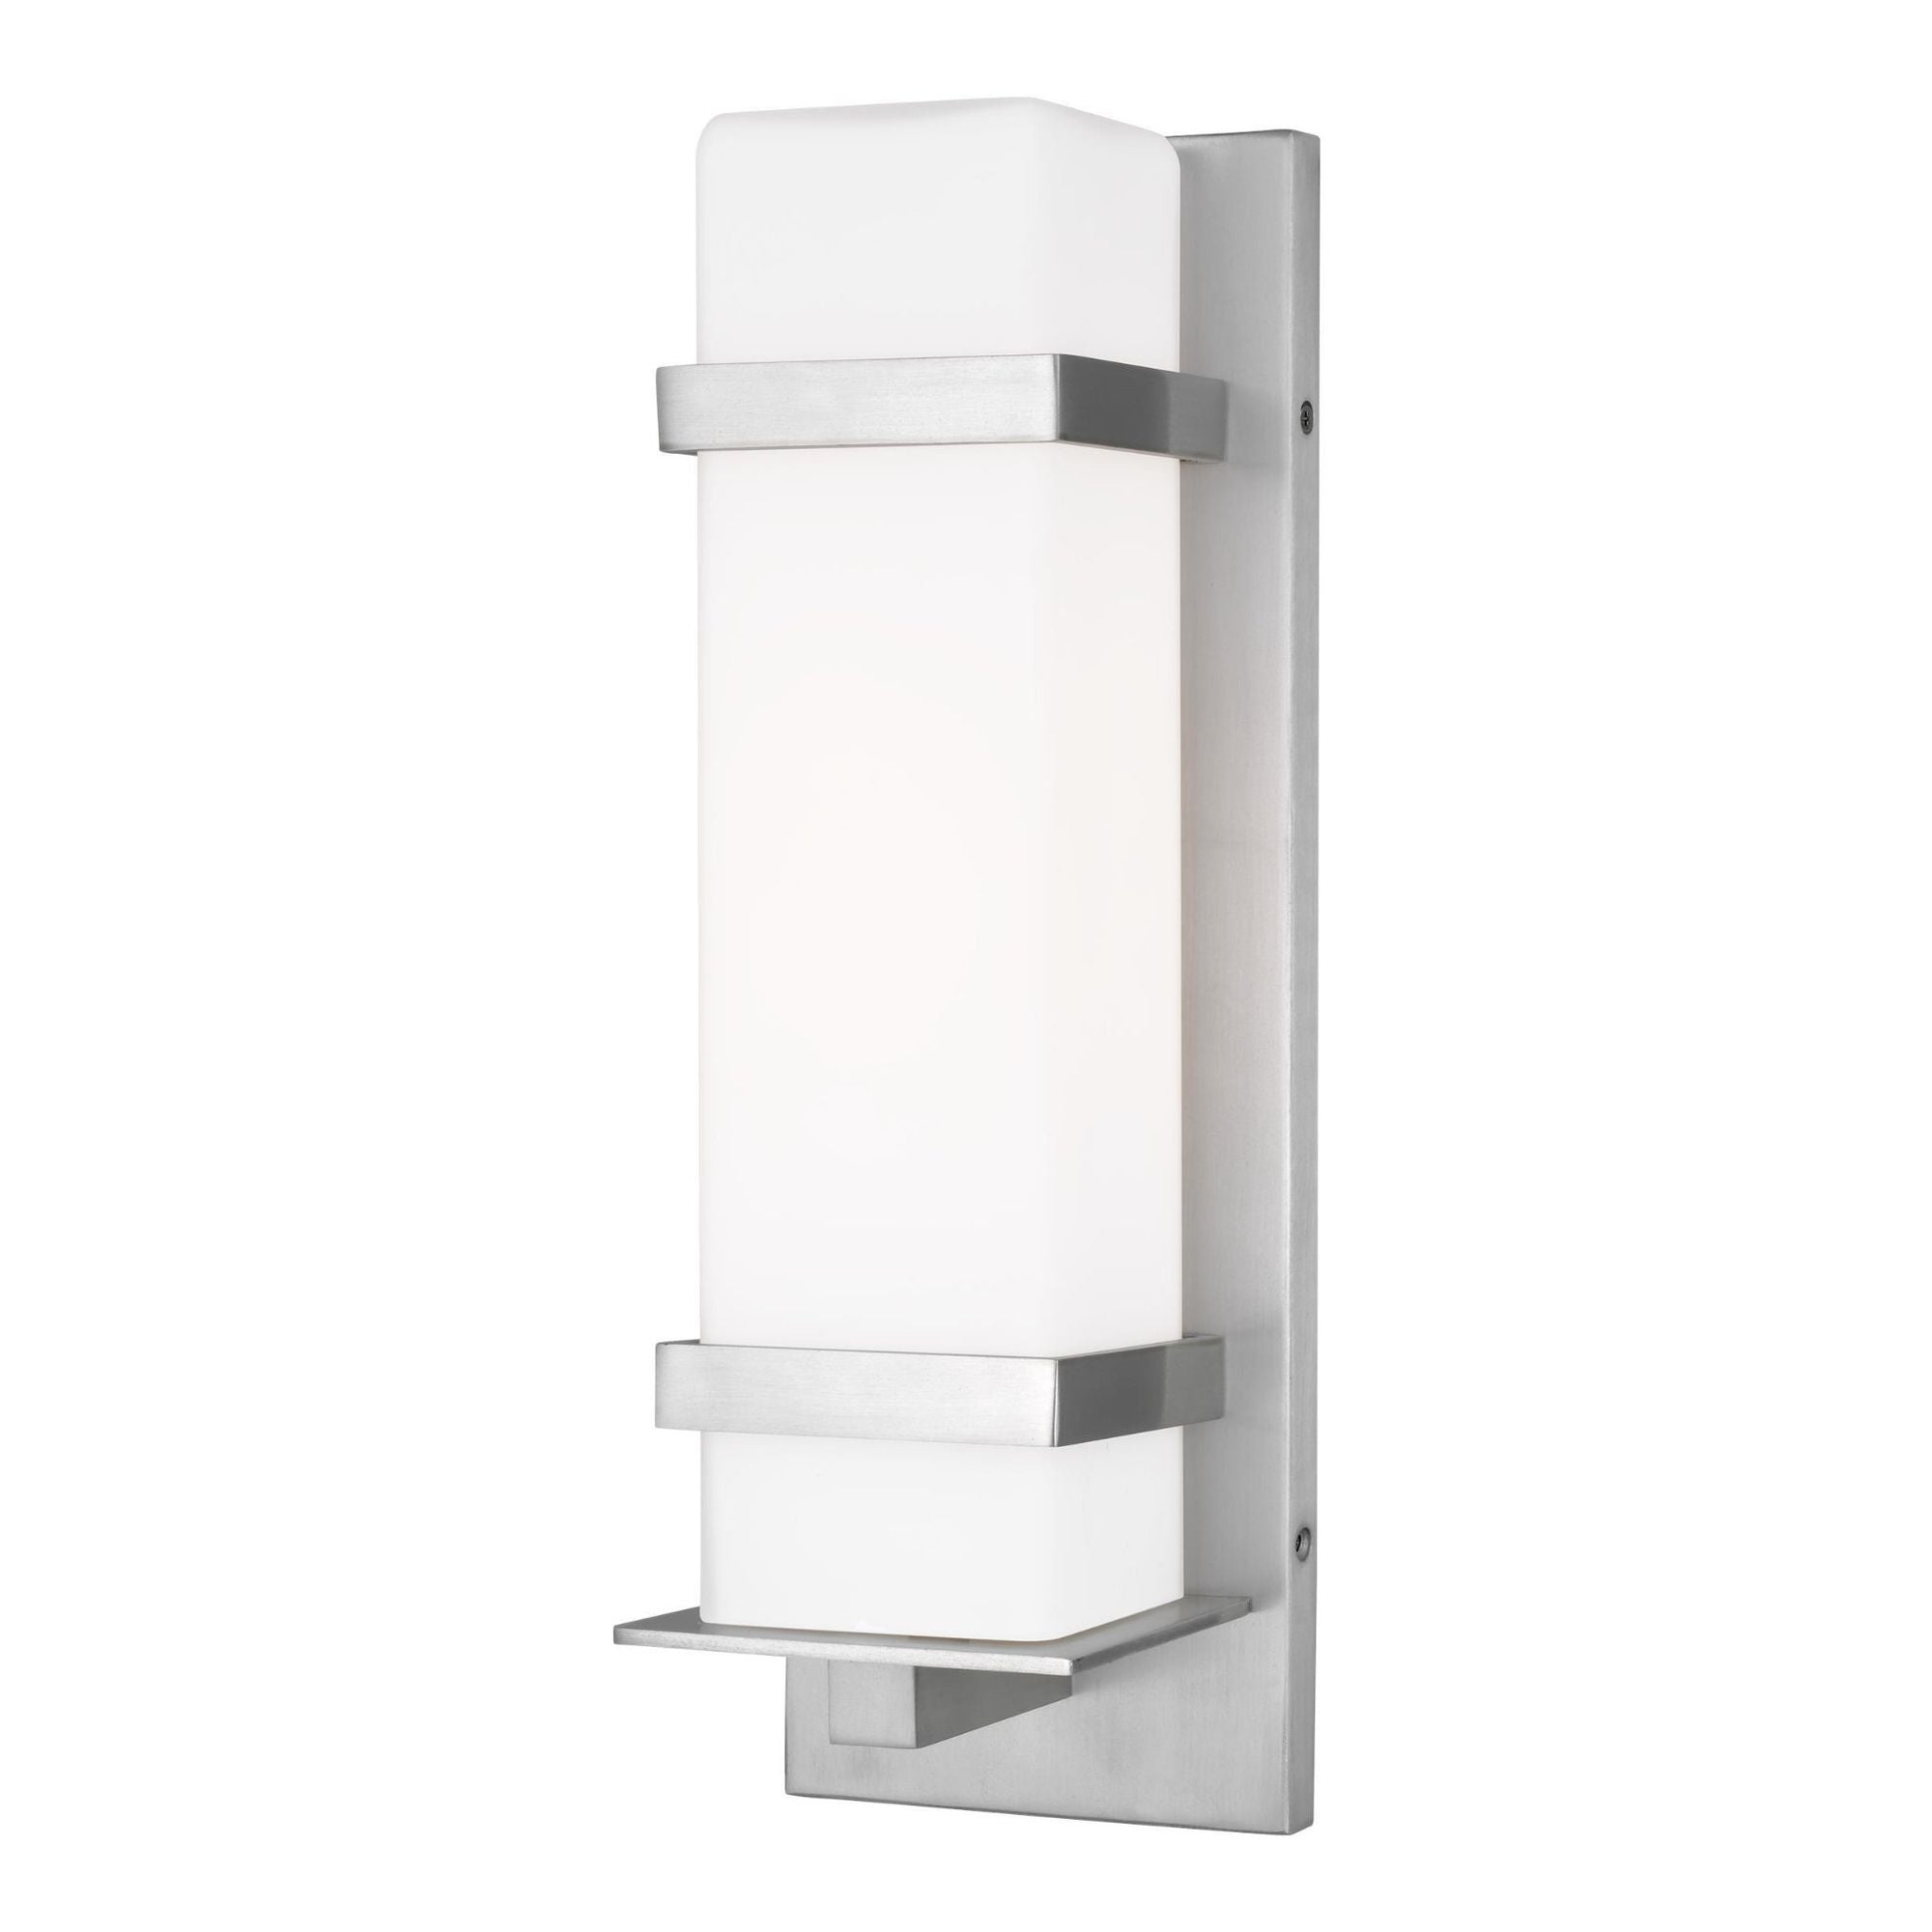 Alban Medium One Light Outdoor Wall Lantern LED Modern Fixture 6" Width 18" Height Aluminum Square Etched Opal Shade in Satin